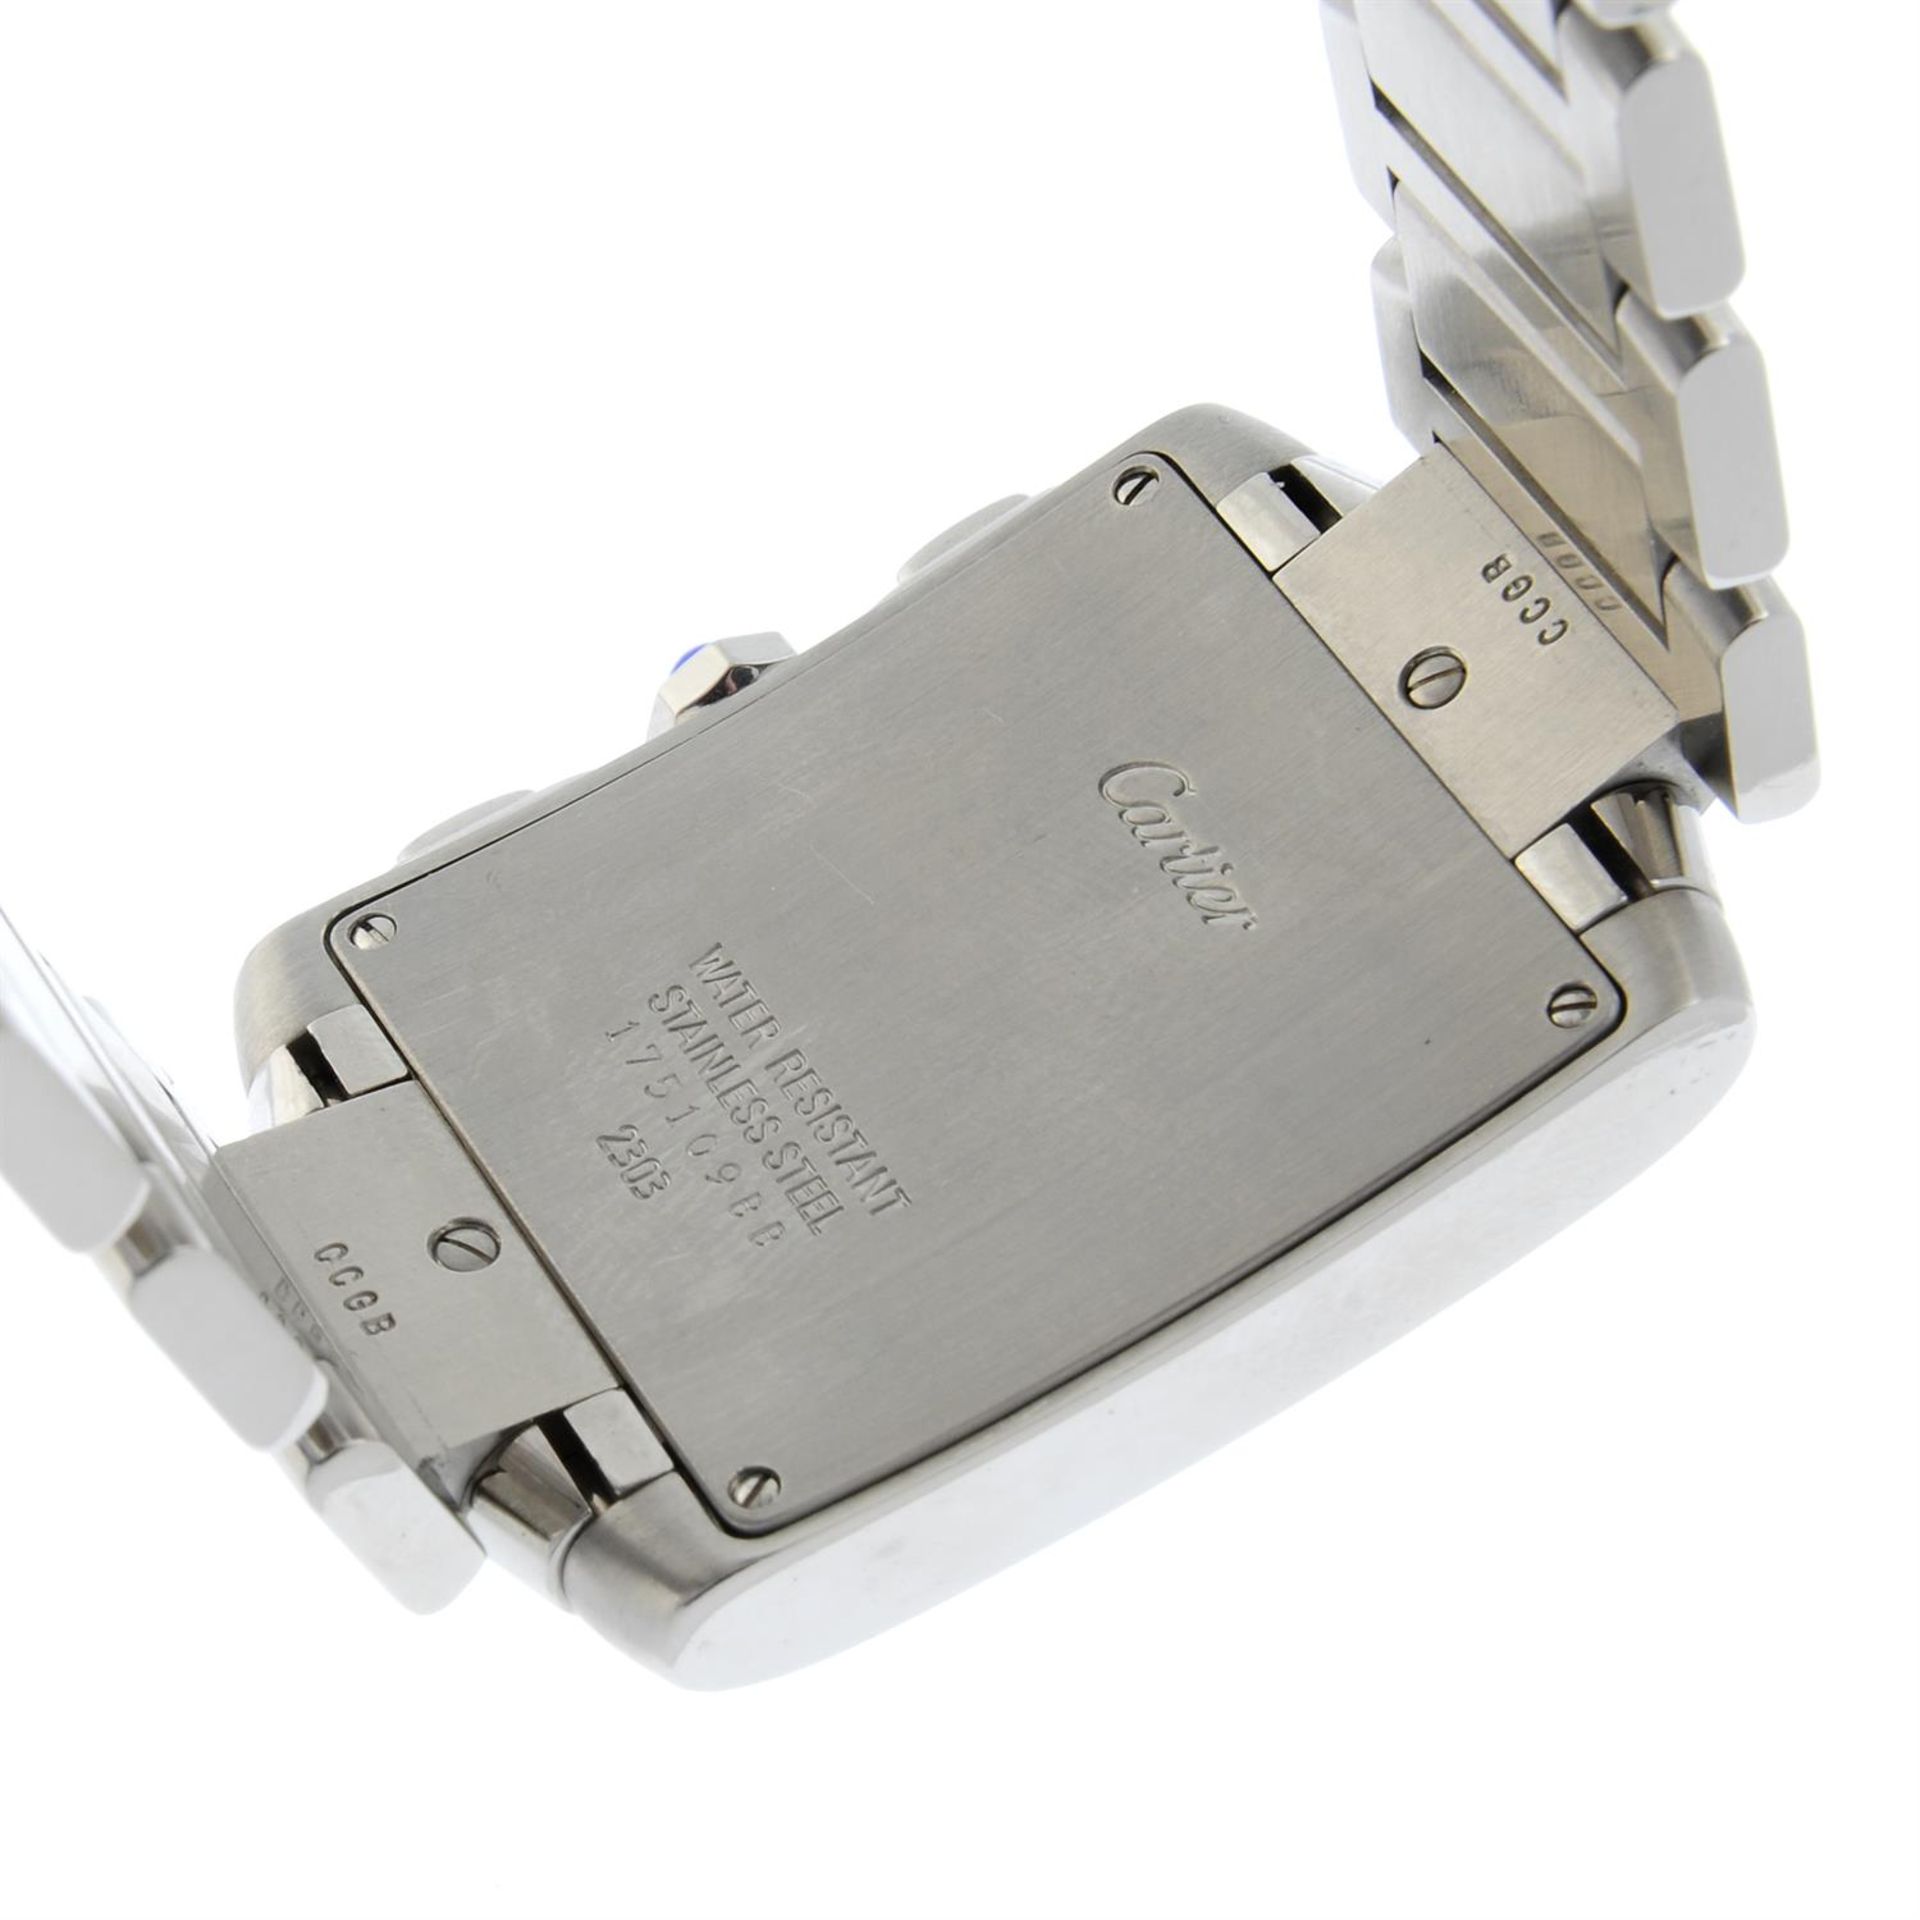 CARTIER - a stainless steel Tank Française chronograph bracelet watch, 28mm x 28mm. - Image 4 of 6